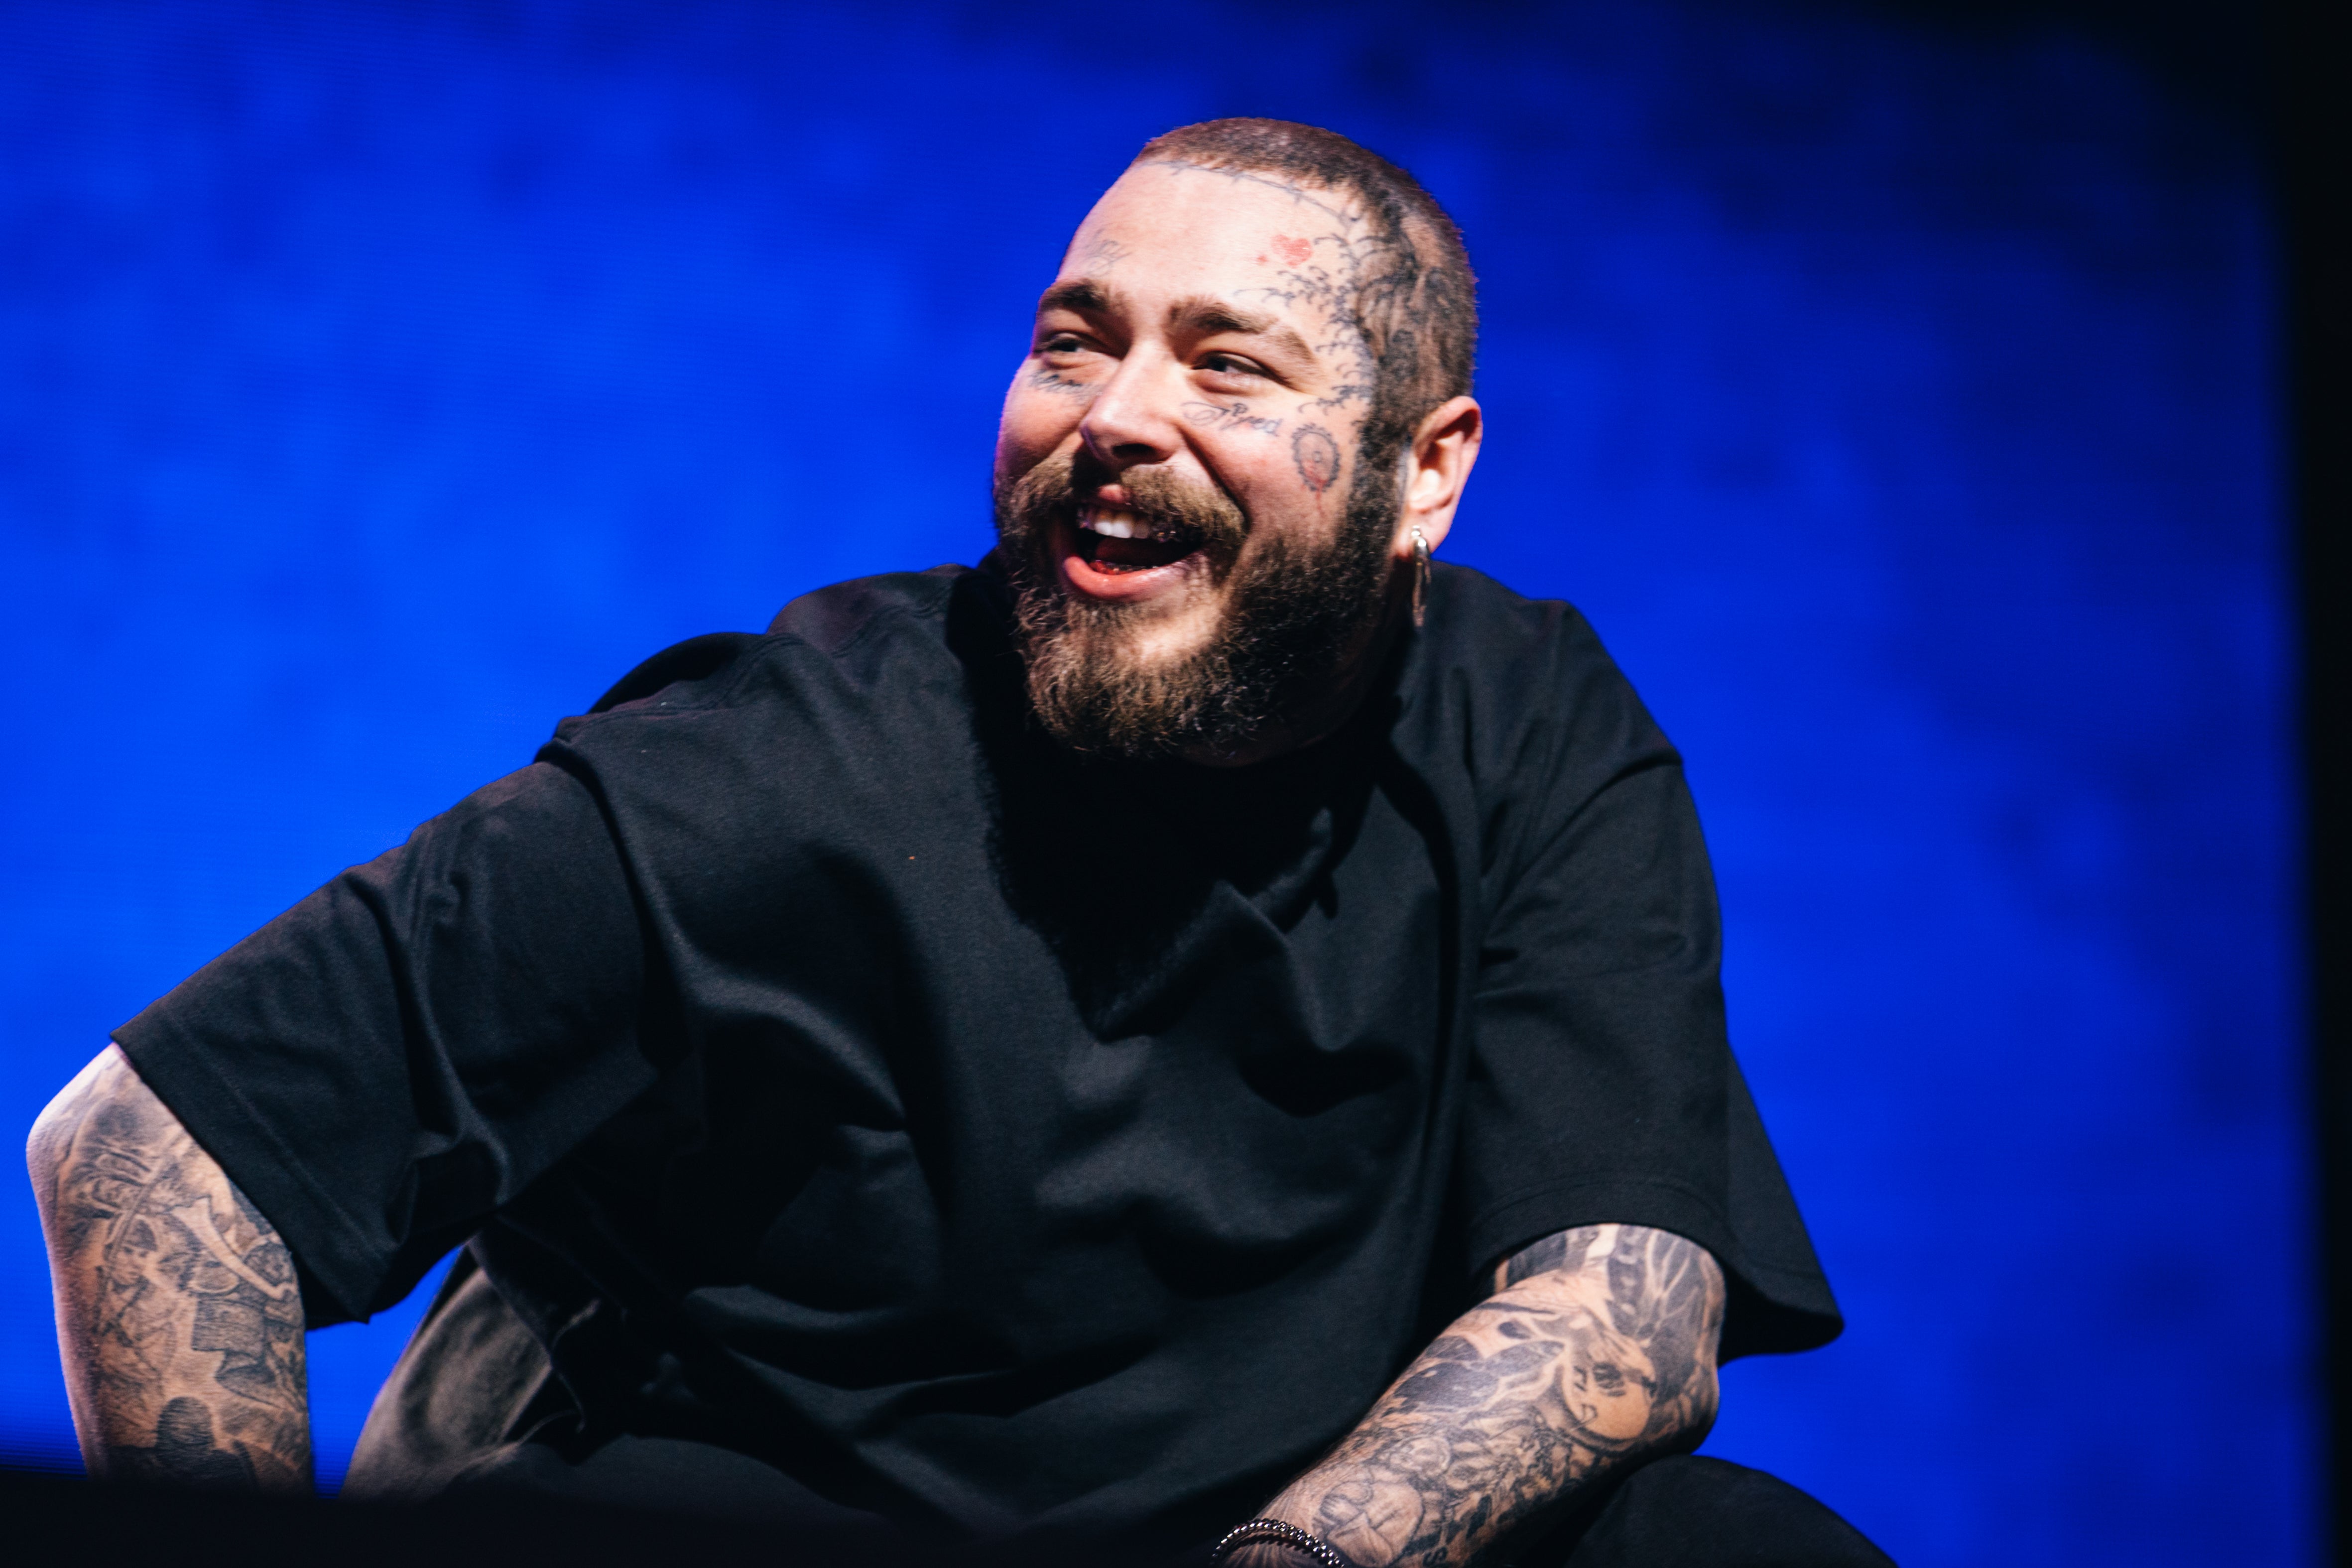 Post Malone Got A HUGE New Face Tattoo And Everyone Is Losing It  PopBuzz